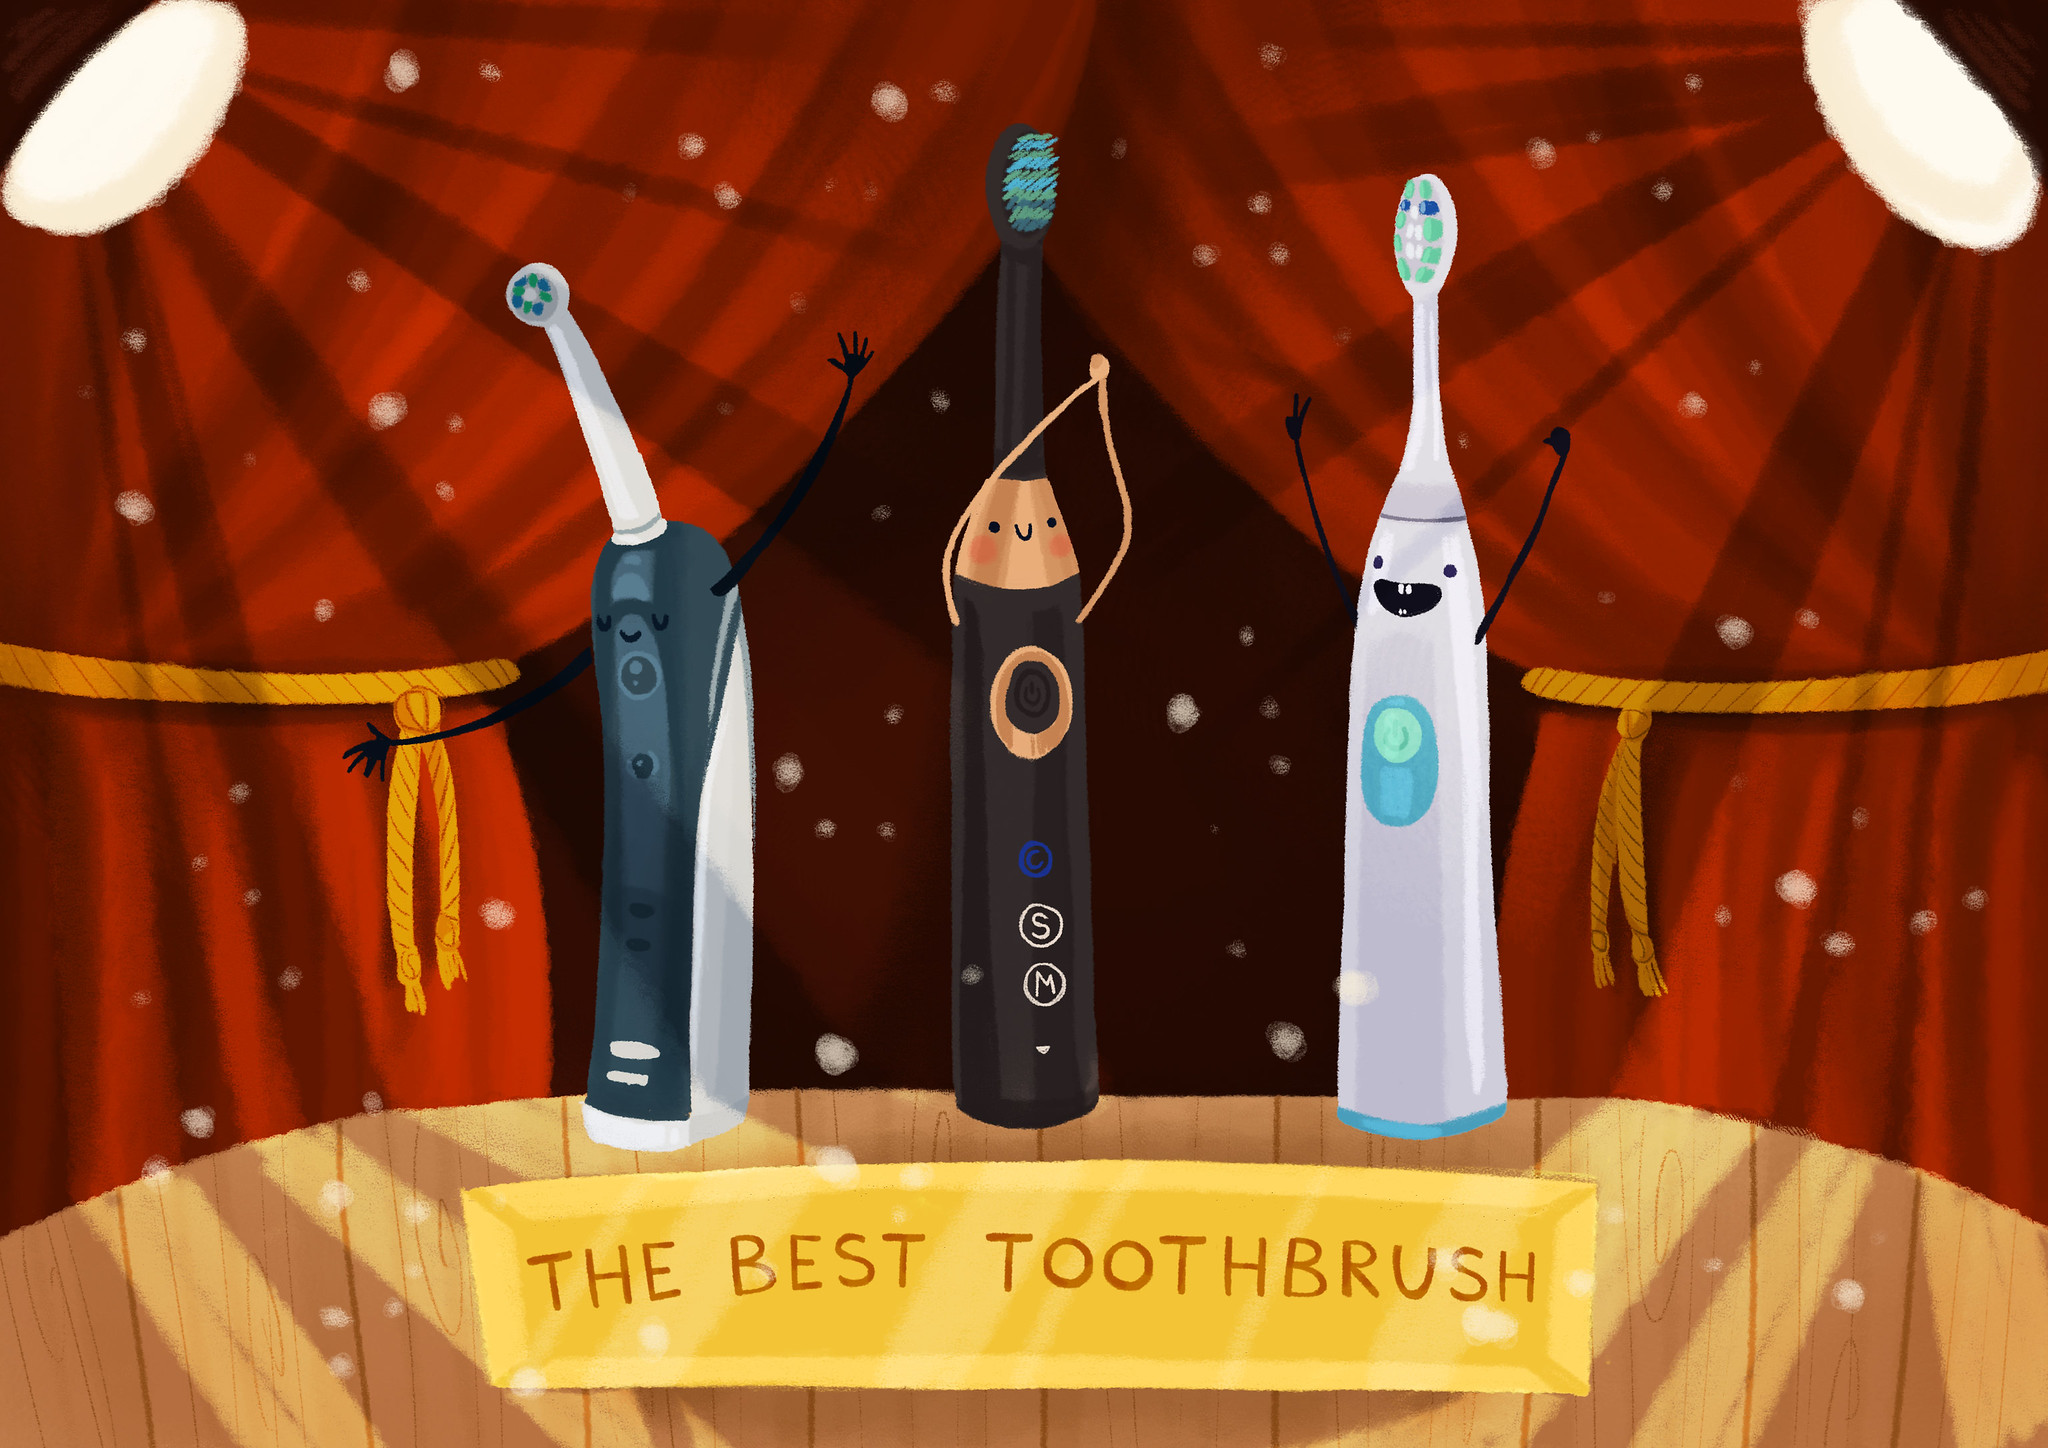 Graphic illustration of three electric toothbrushes with a label "the best toothbrush"